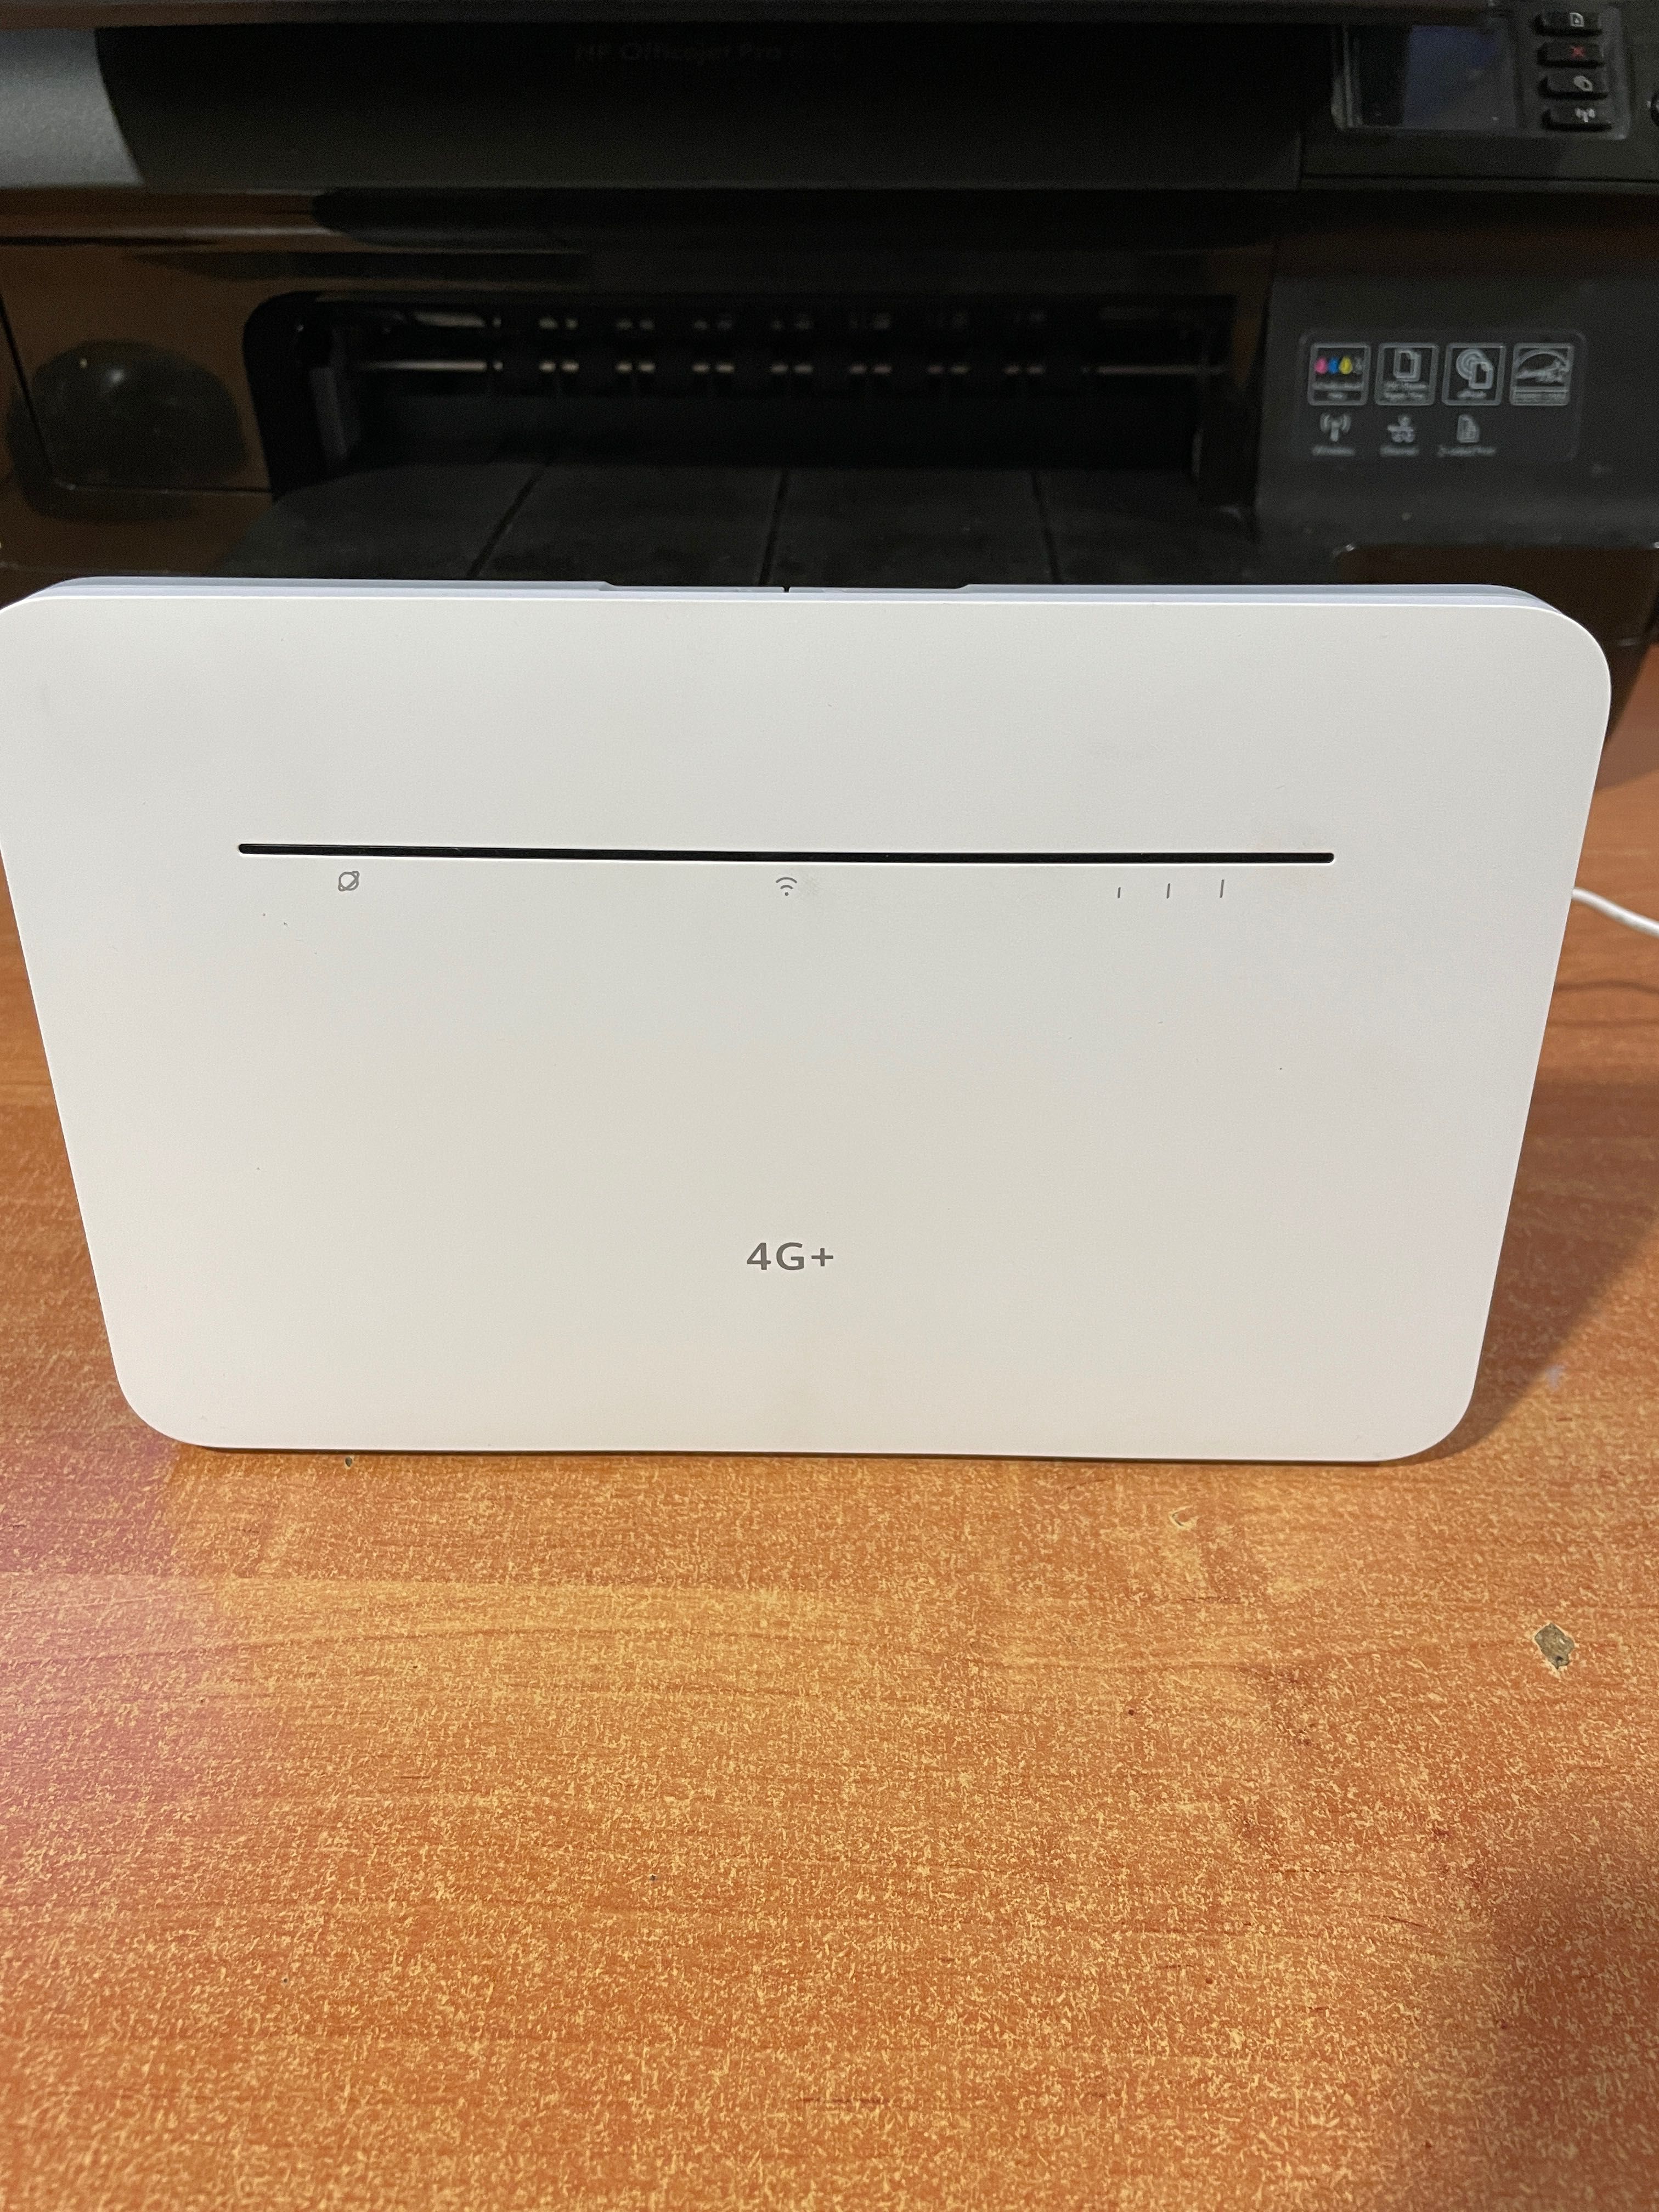 Router Soyealink B535-333